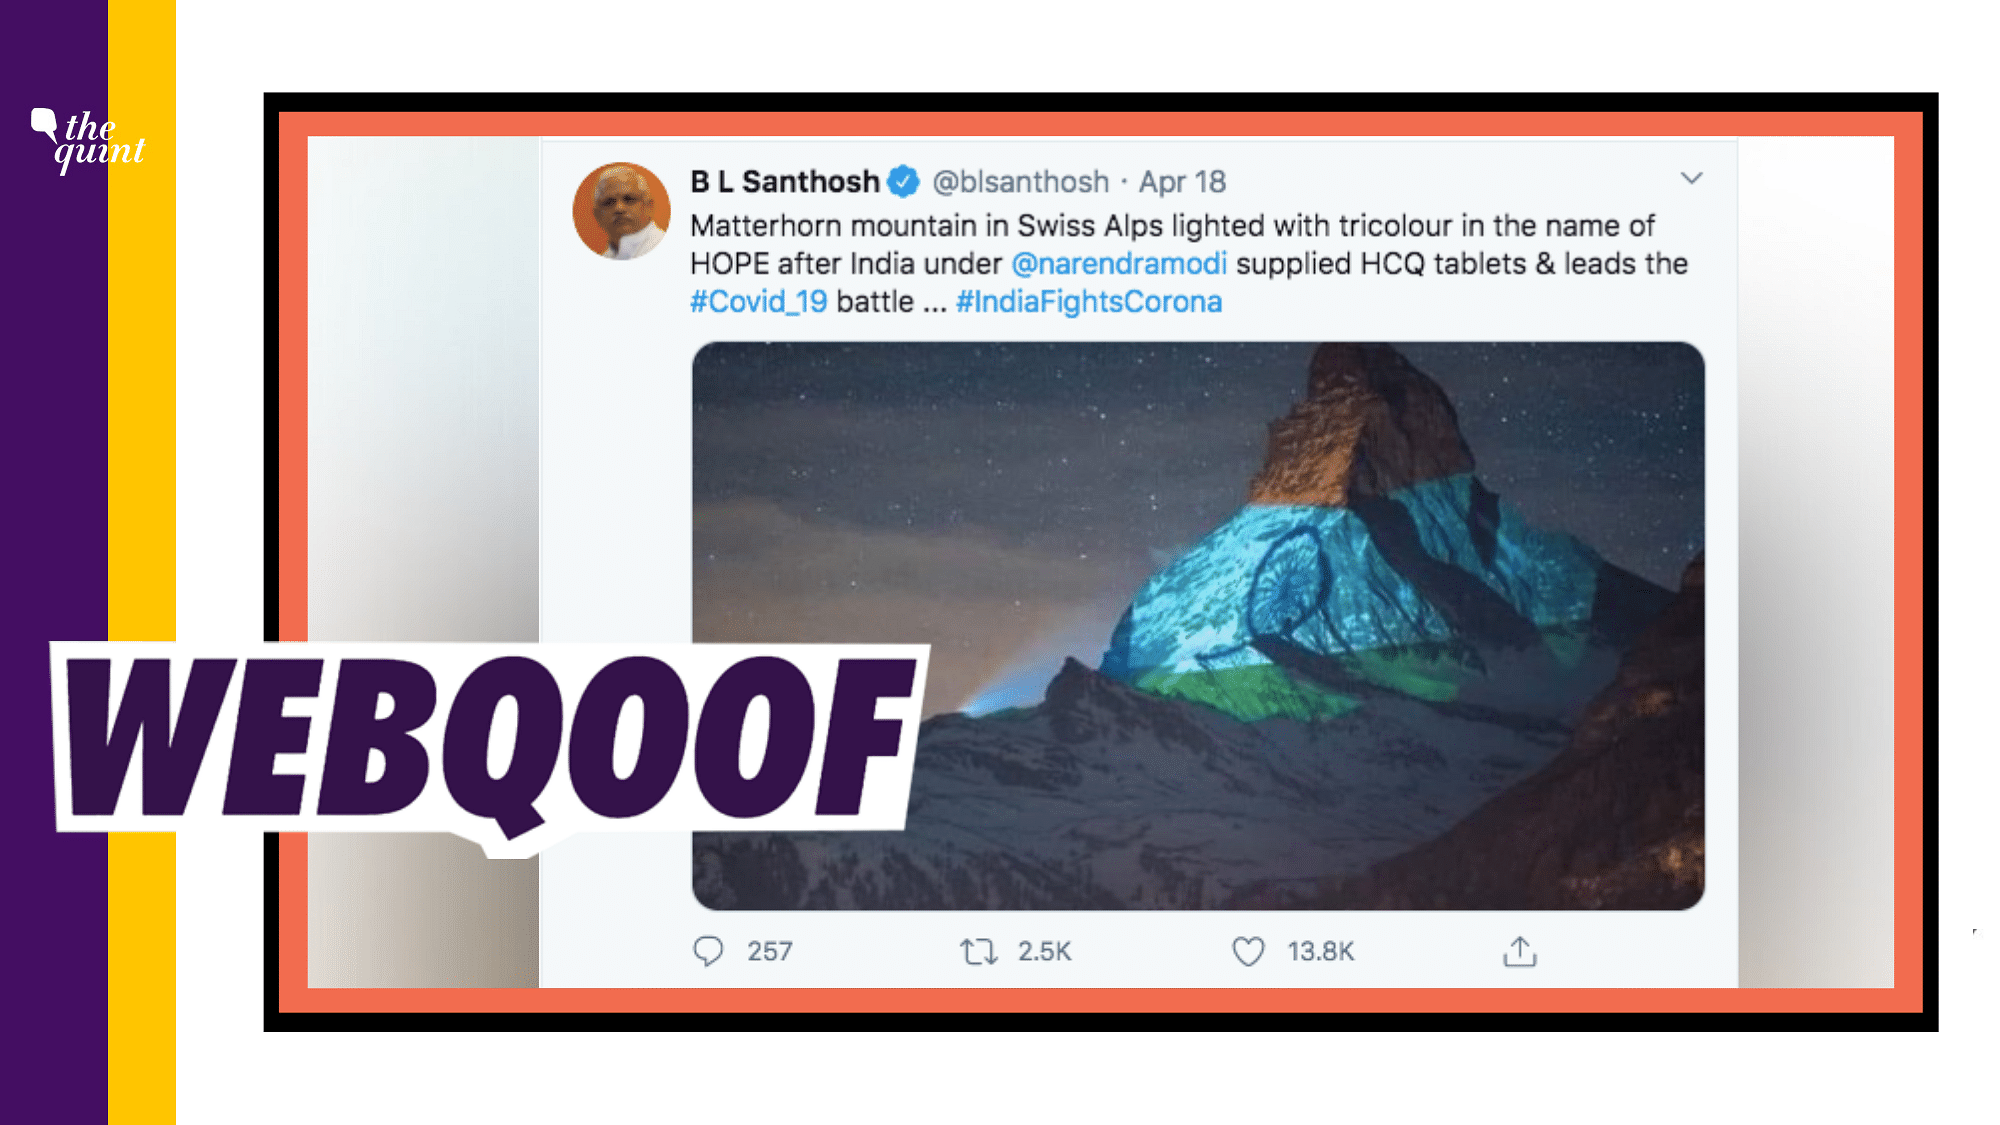 The claim is that Matterhorn mountain was lighted up with the Indian flag after PM Modi supplied HCQ tablets.